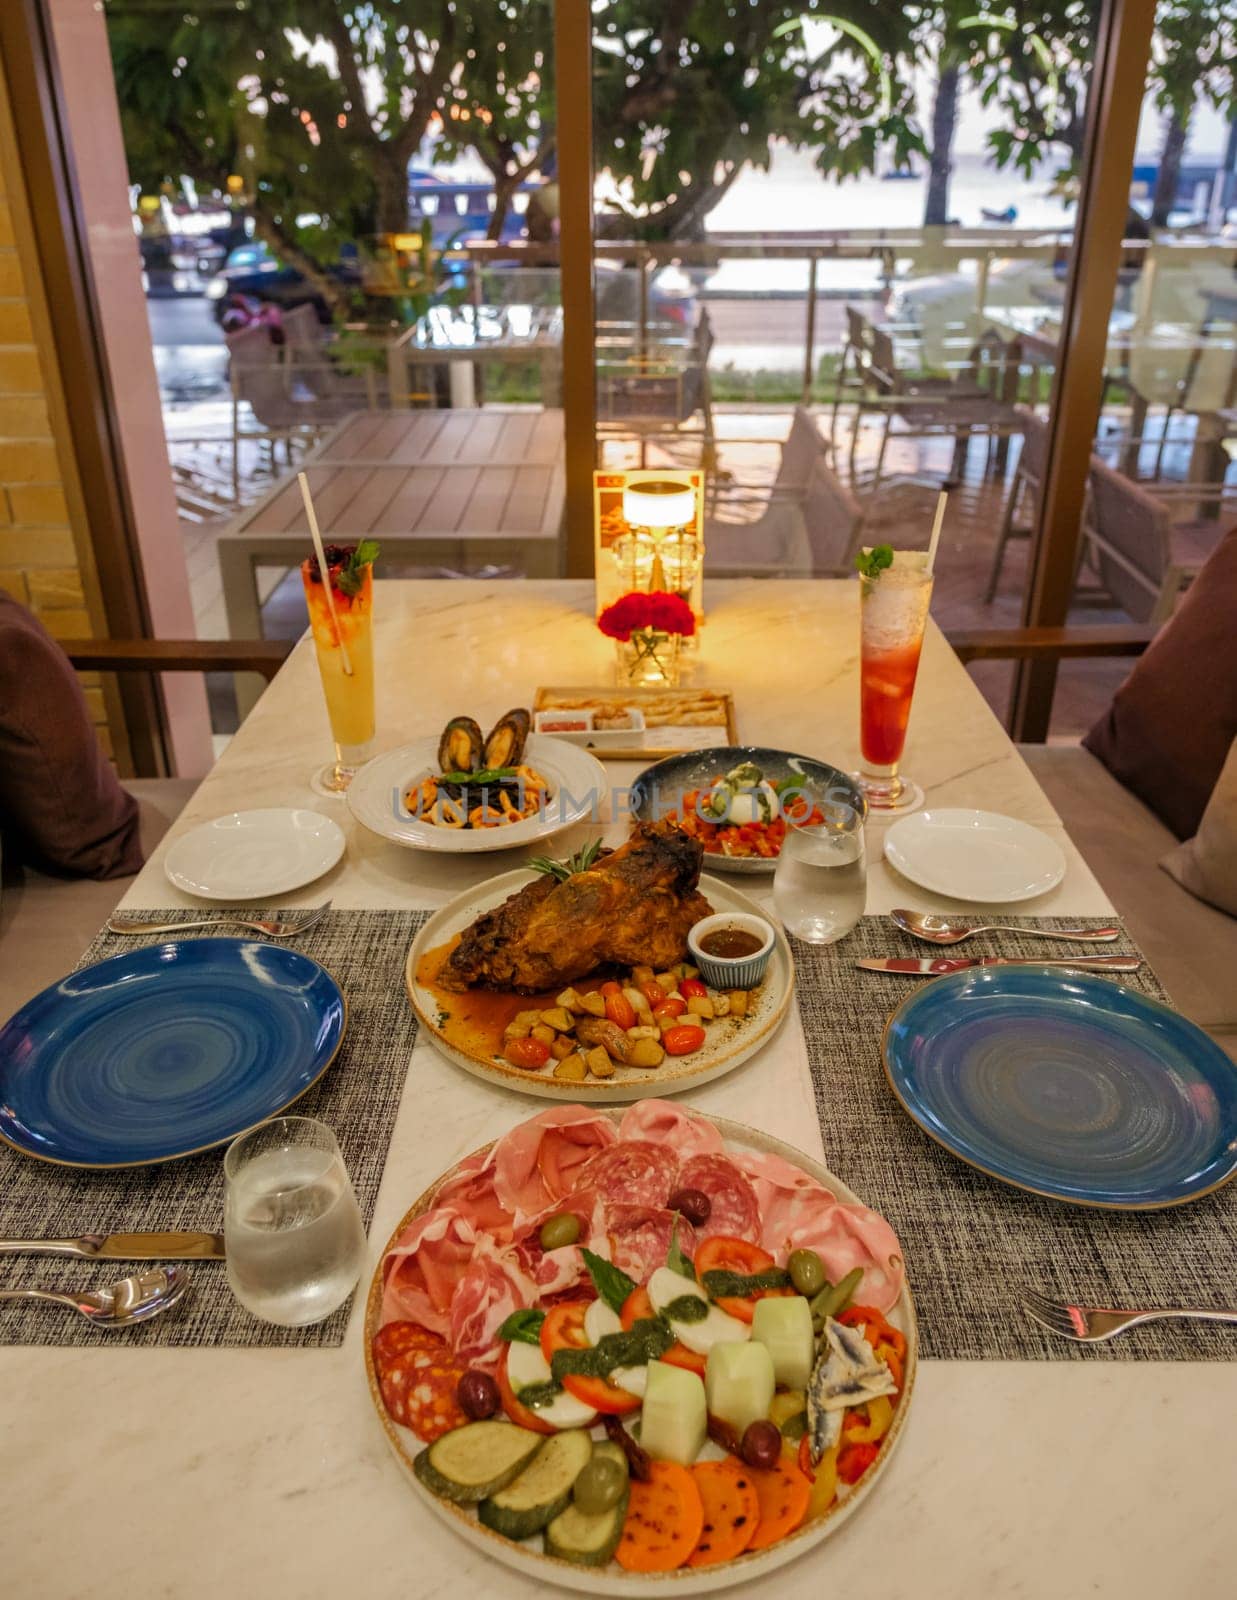 dinner table in an Italian restaurant in Thailand, antipasti with pork and pizza